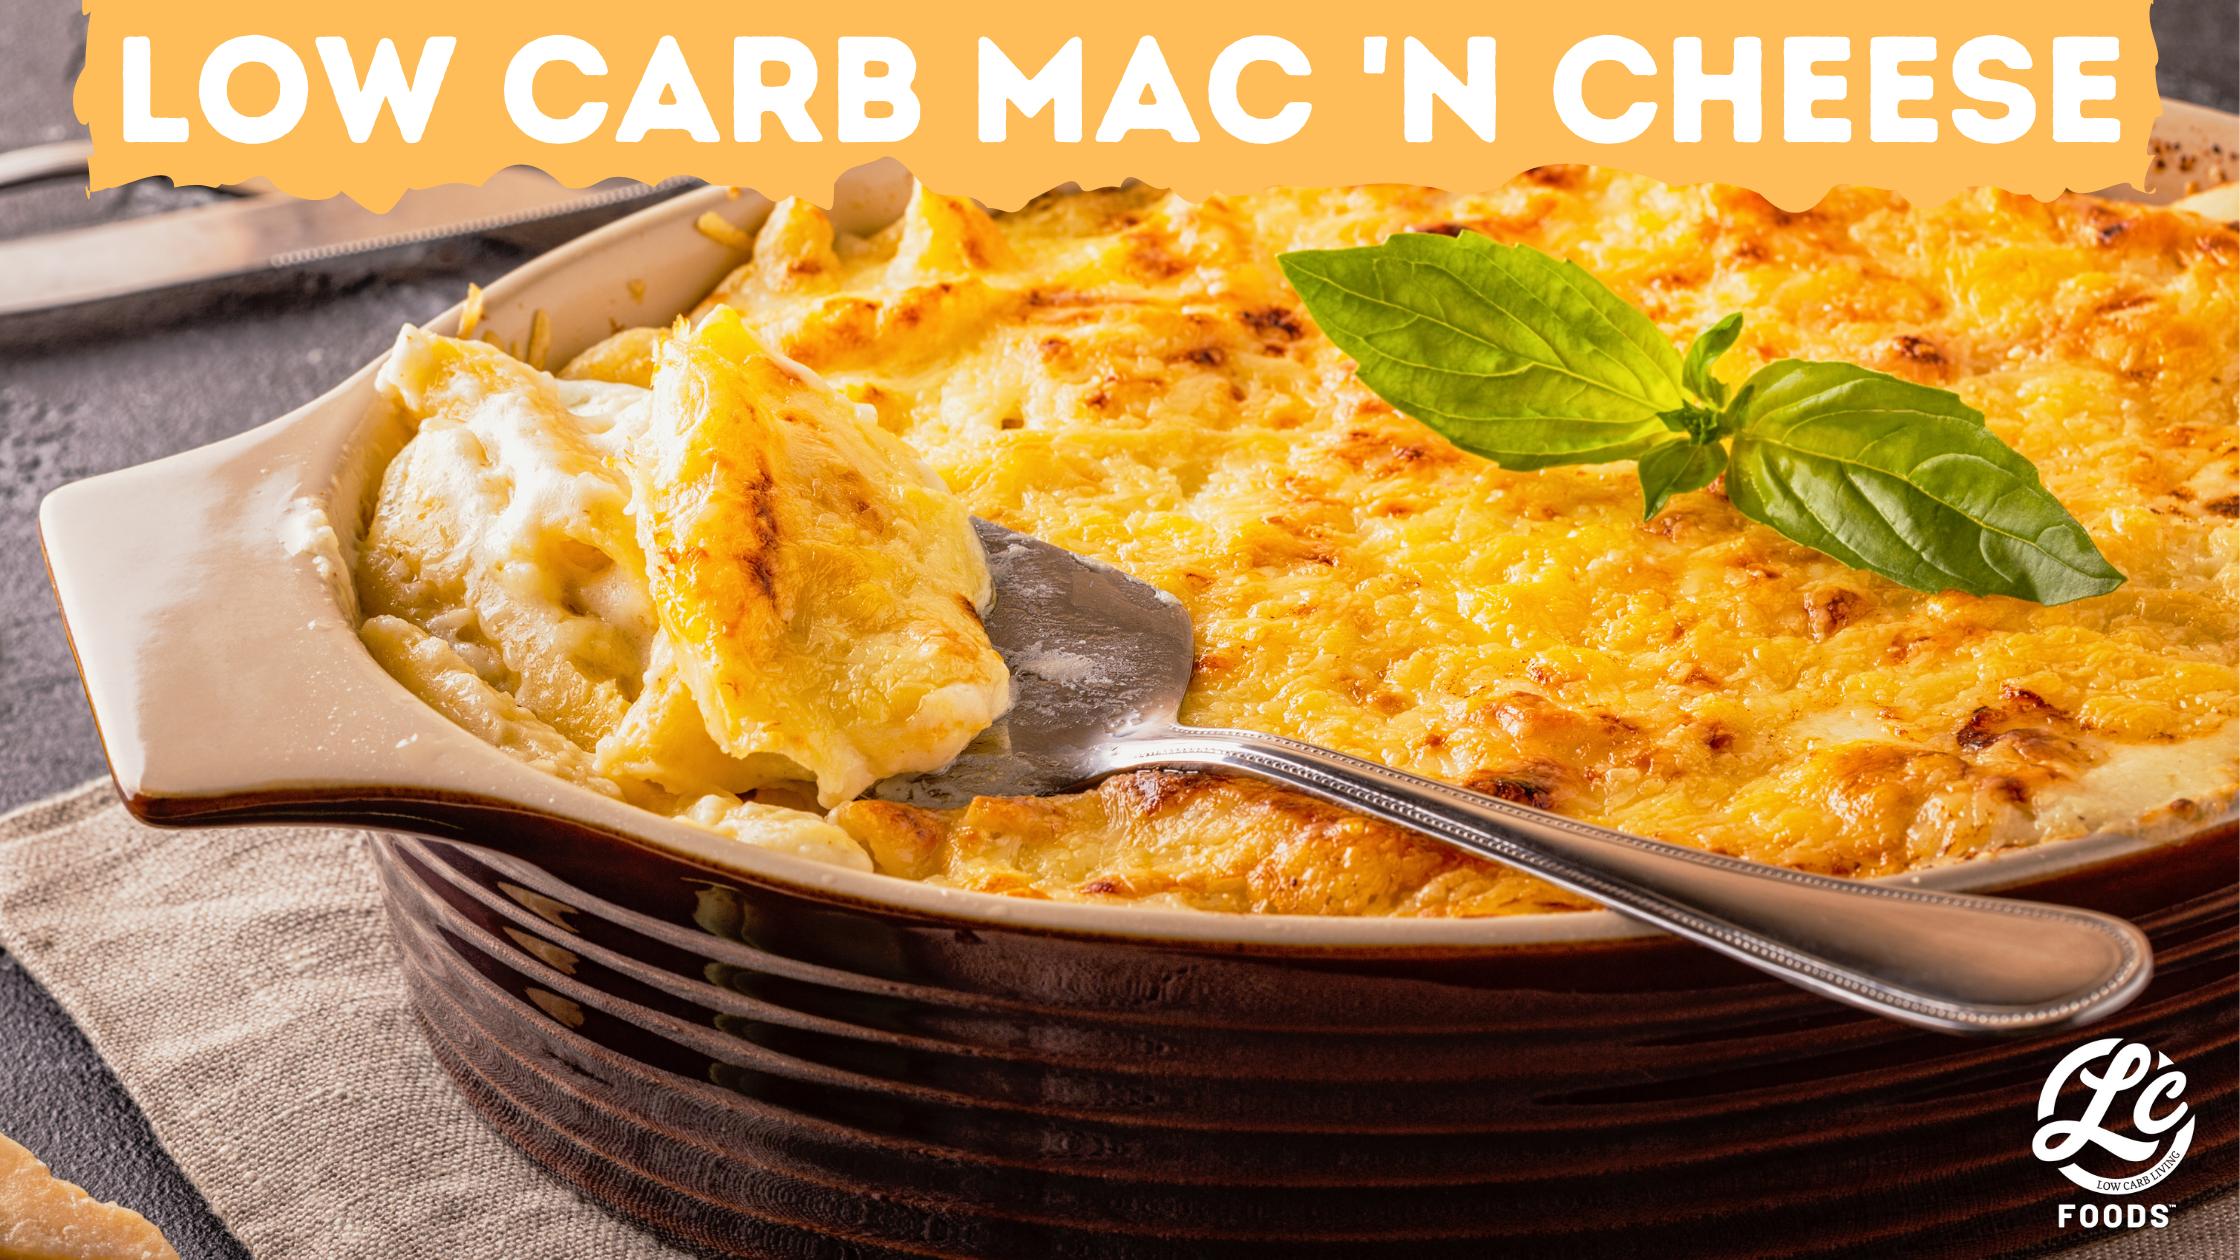 Thumbnail for Low Carb Mac ‘n Cheese